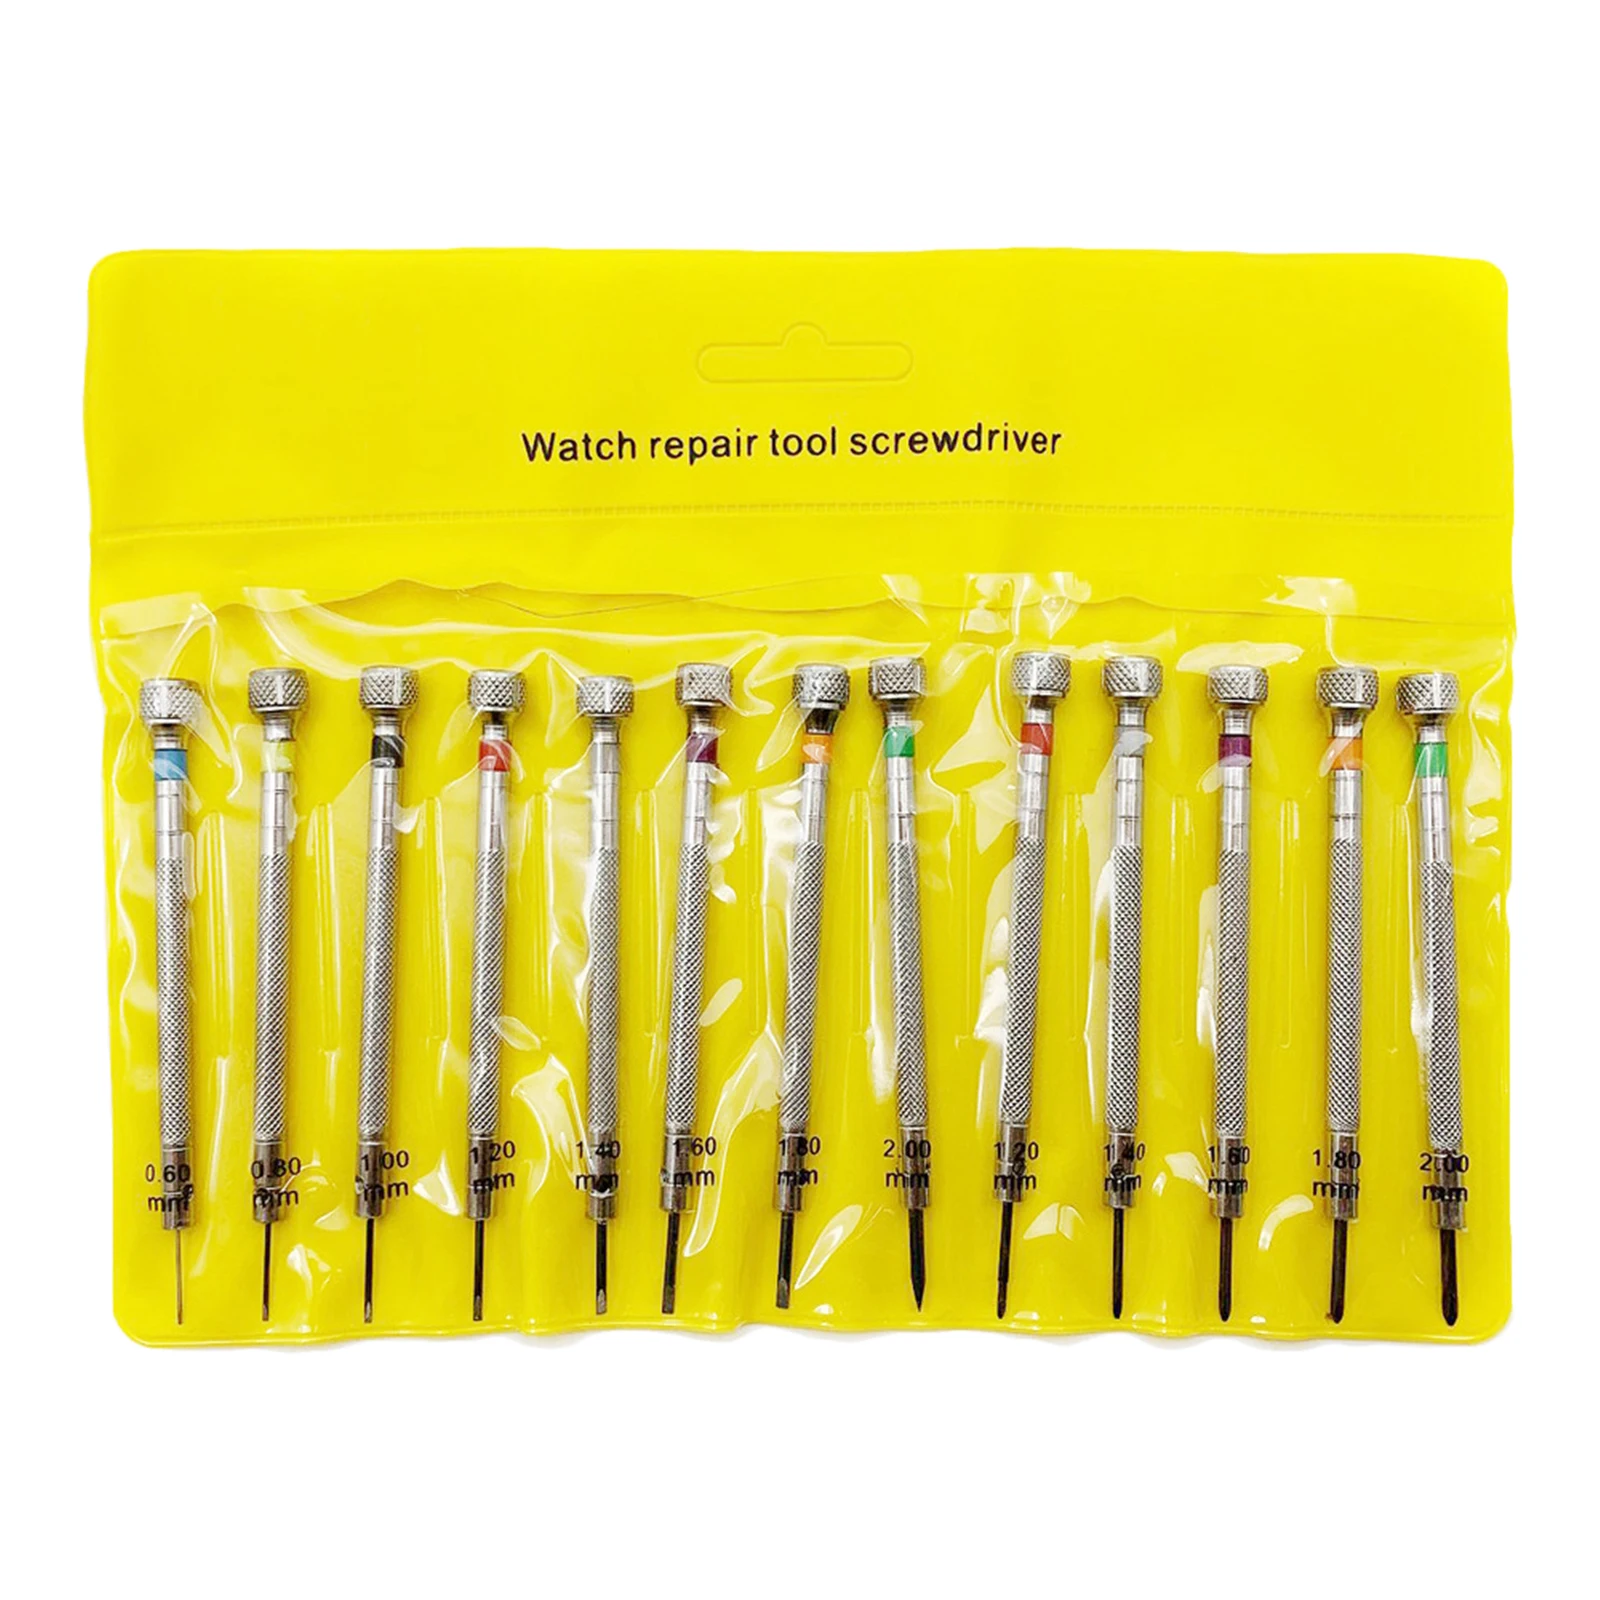 13 Pieces Watch Repair Screwdriver Set Tool 0.6mm-2.0mm for Jewelry